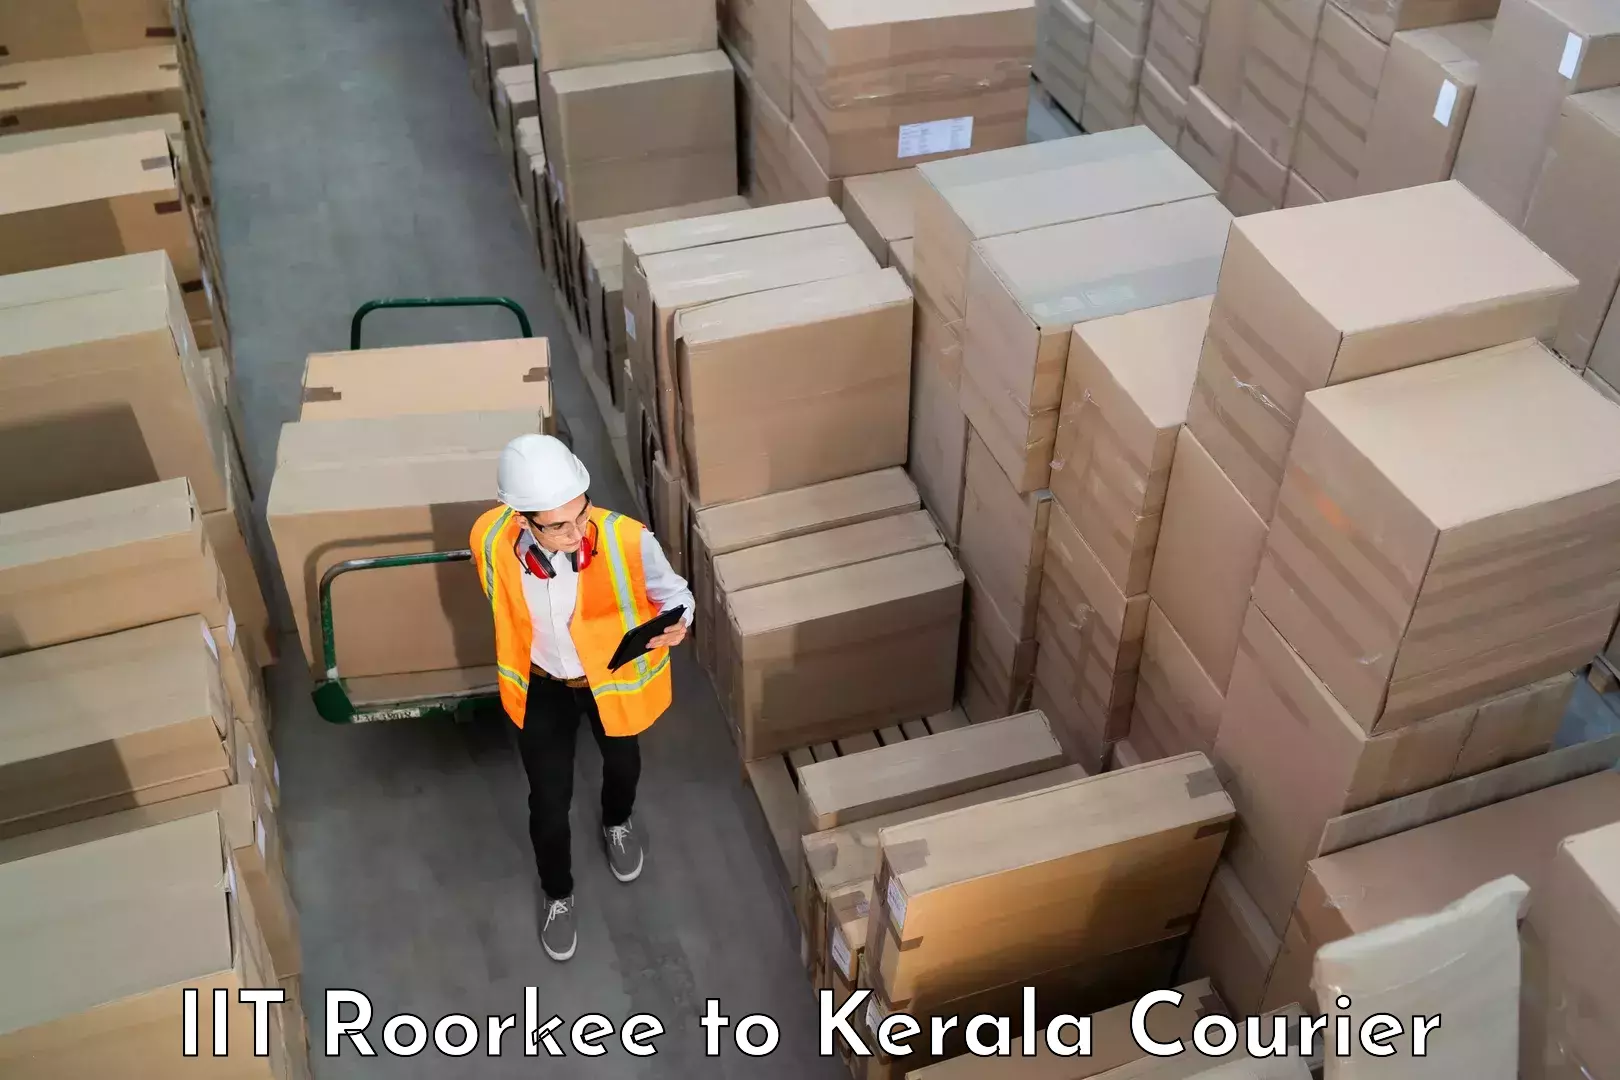 Luggage delivery network IIT Roorkee to Kerala